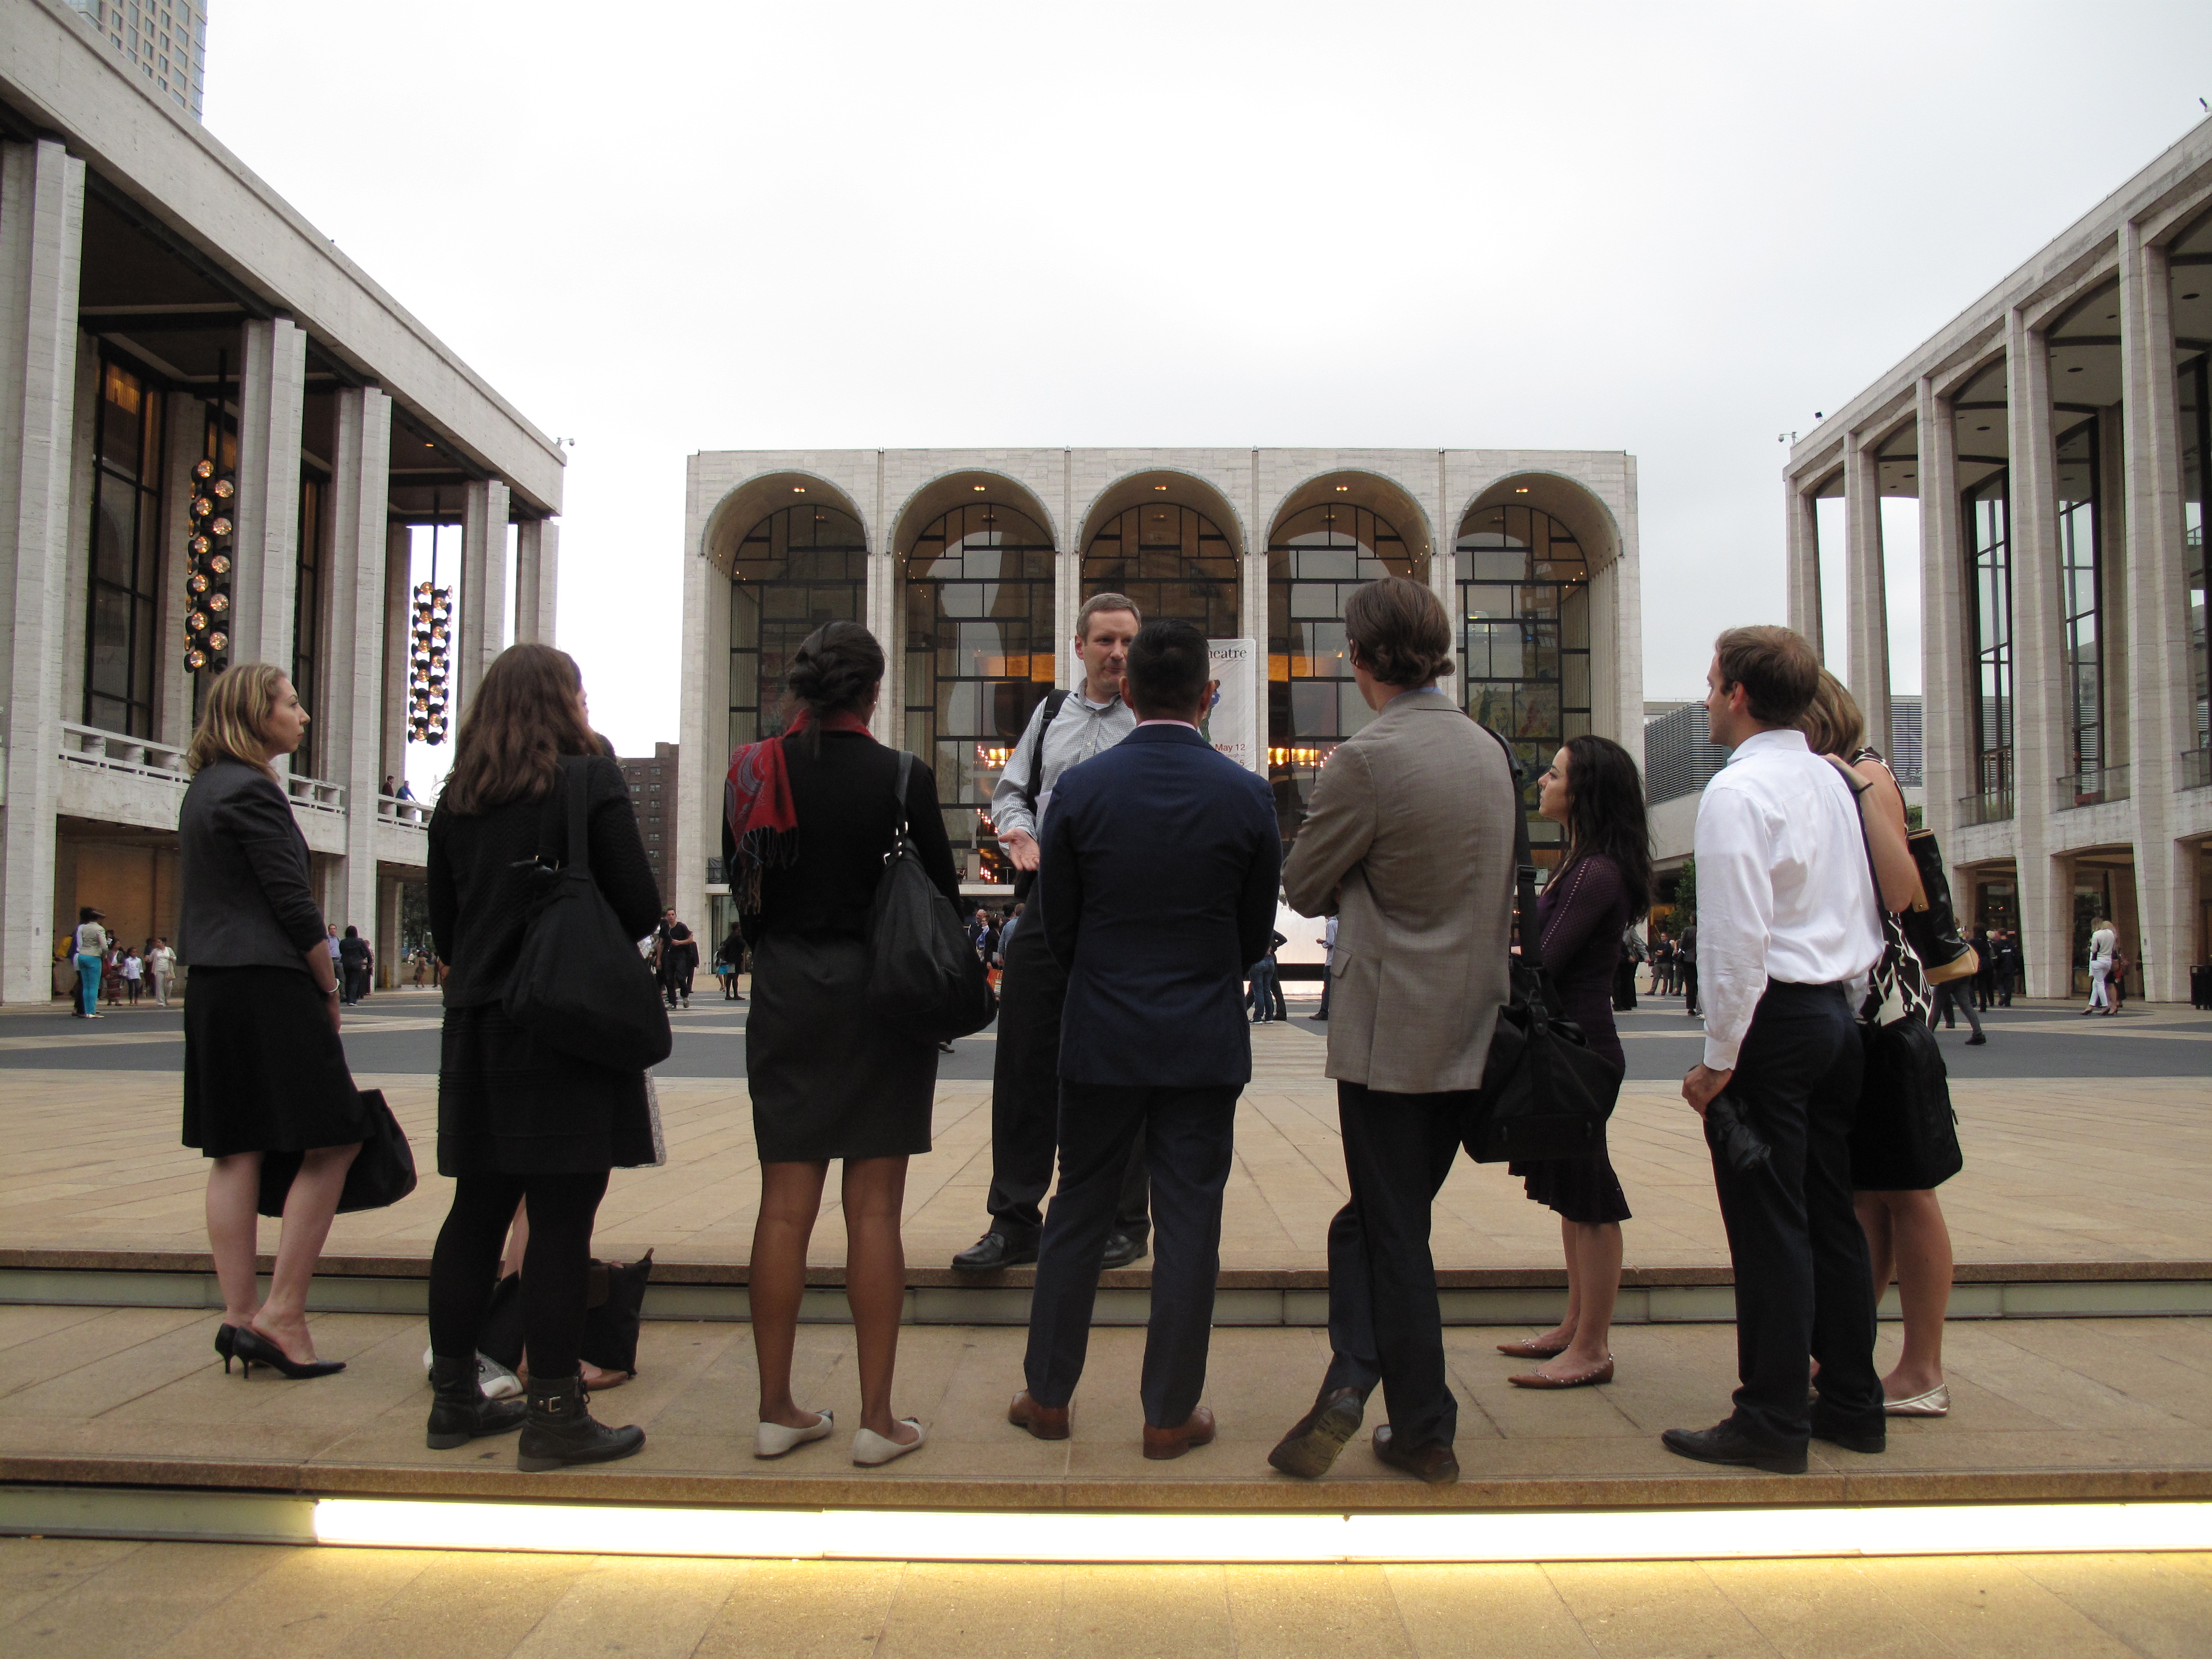 Tour of Lincoln Center